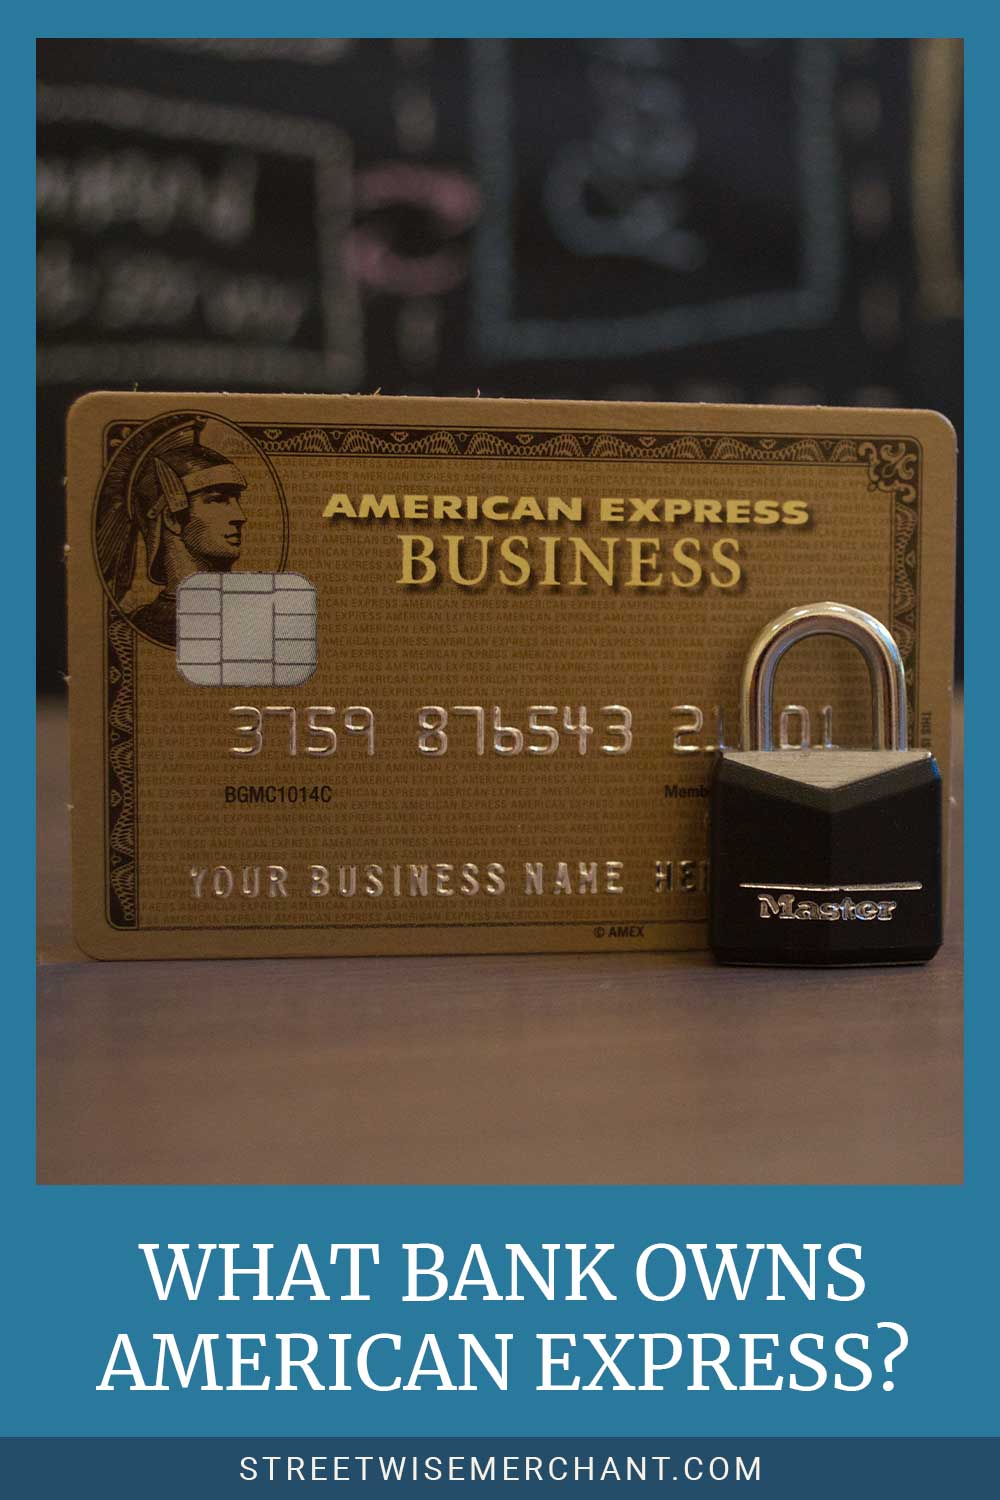 An American Express credit card and a lock - What Bank Owns this?